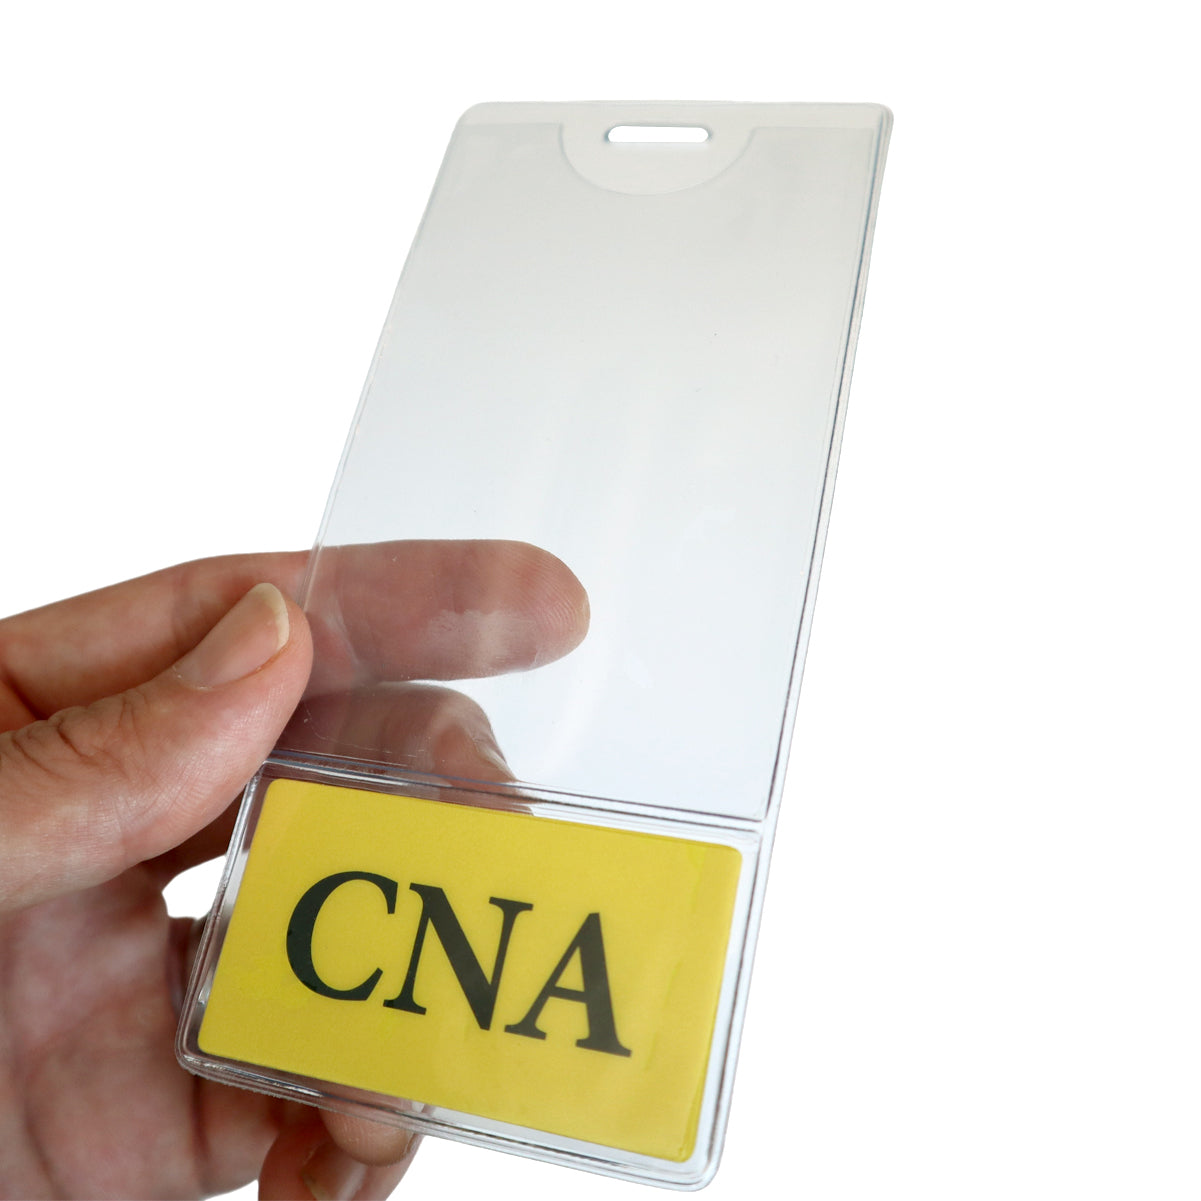 Cna BadgeBottom Badge Holder & Badge Buddy in One!! - Vertical ID Badge Sleeve with Bottom Role Tag for Nurse Assistants